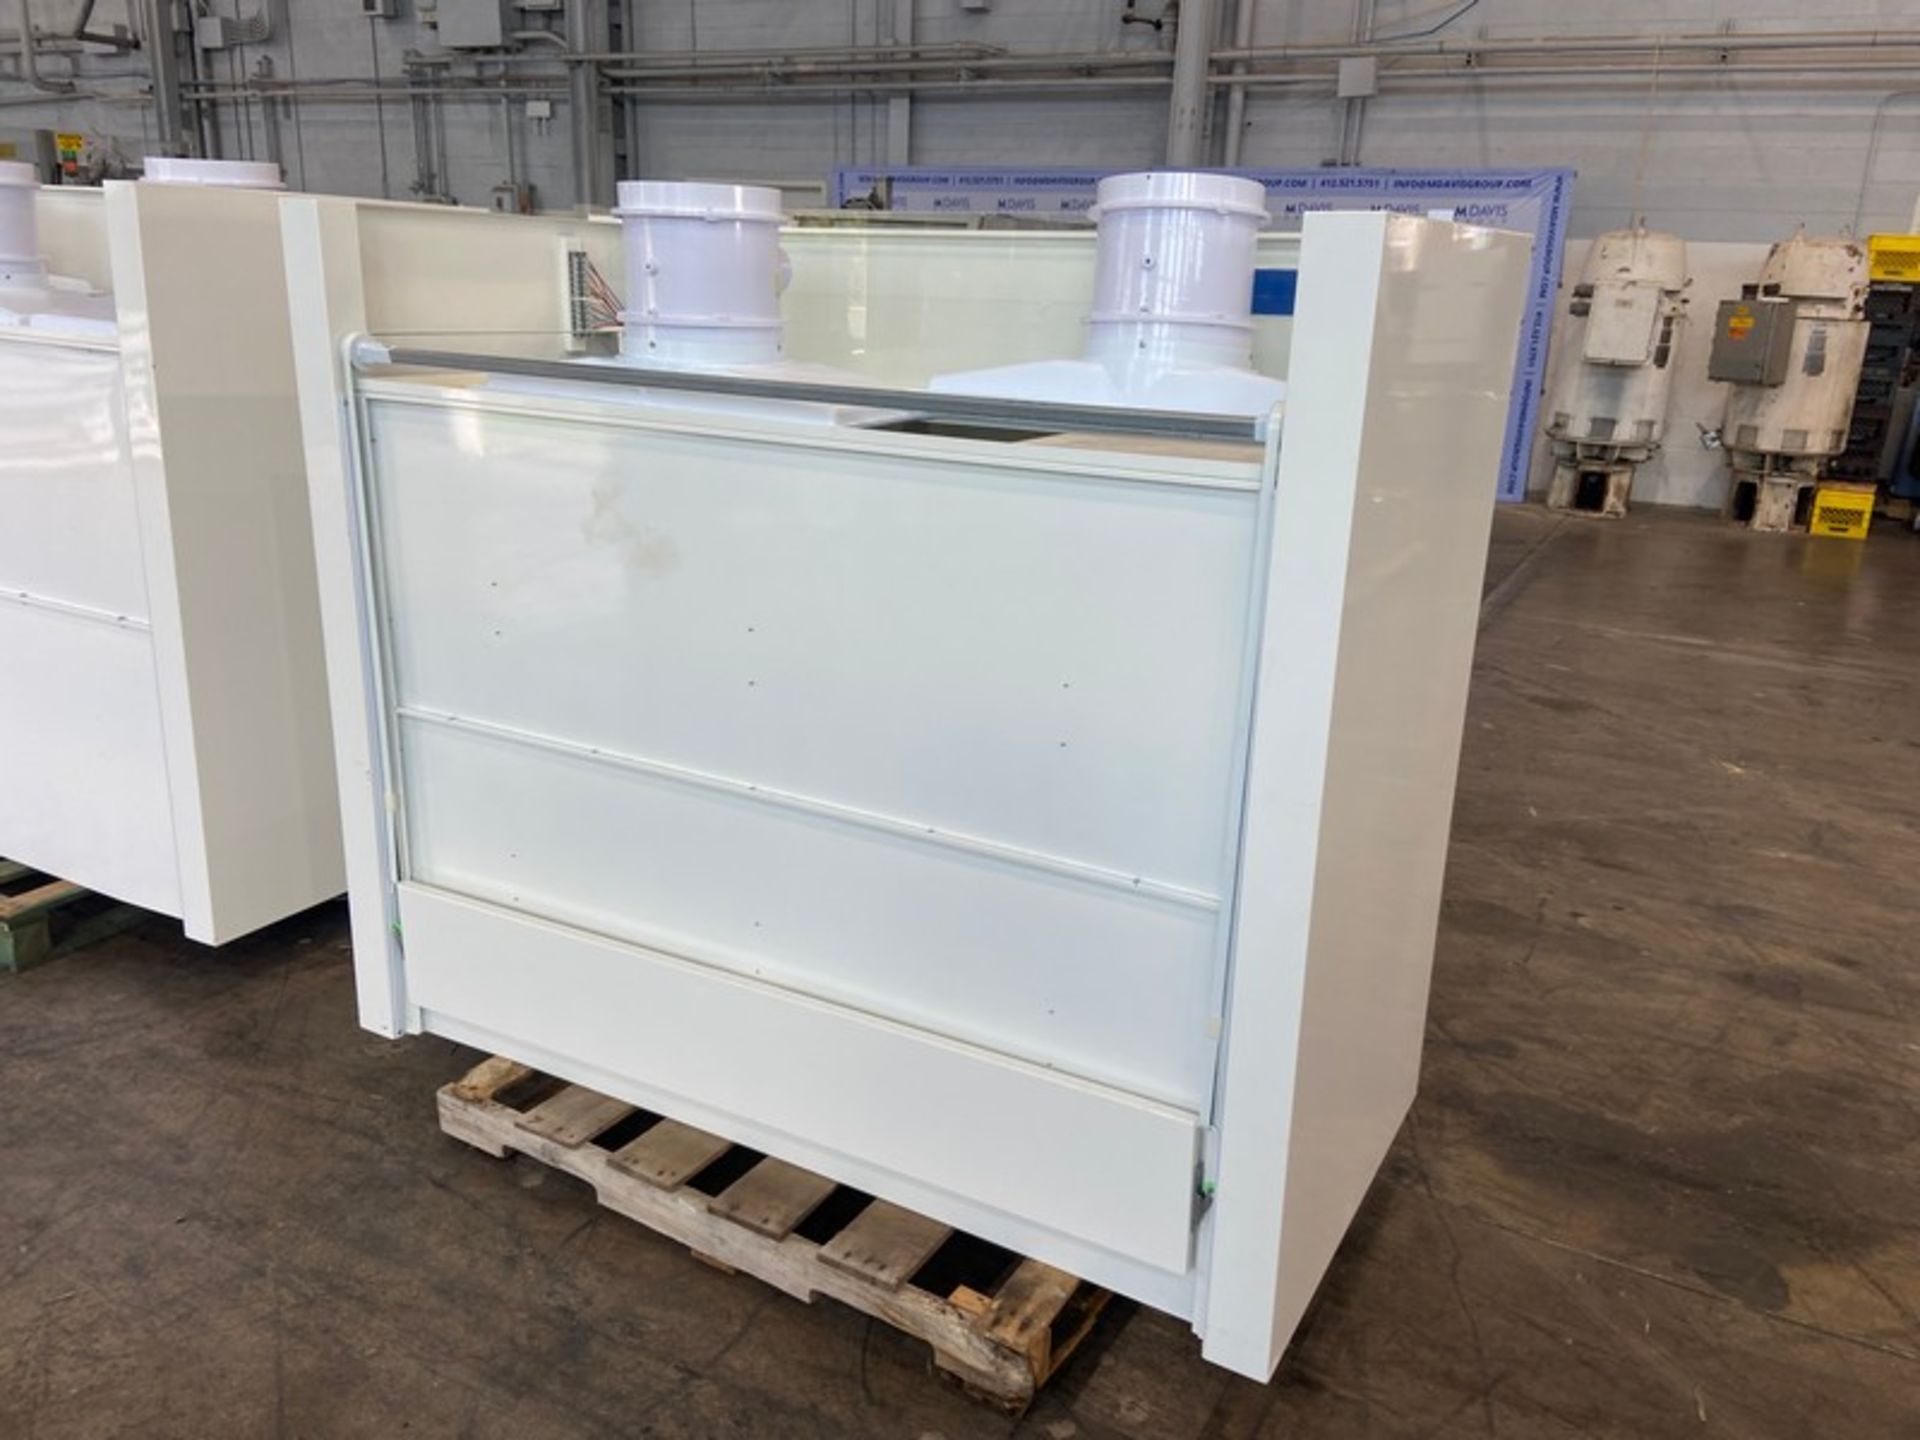 Fume Hood, Overall Dims.: Aprox. 71” L x 33-1/2” W x 59” H (INV#97140) (Located @ the MDG Auction - Image 3 of 3